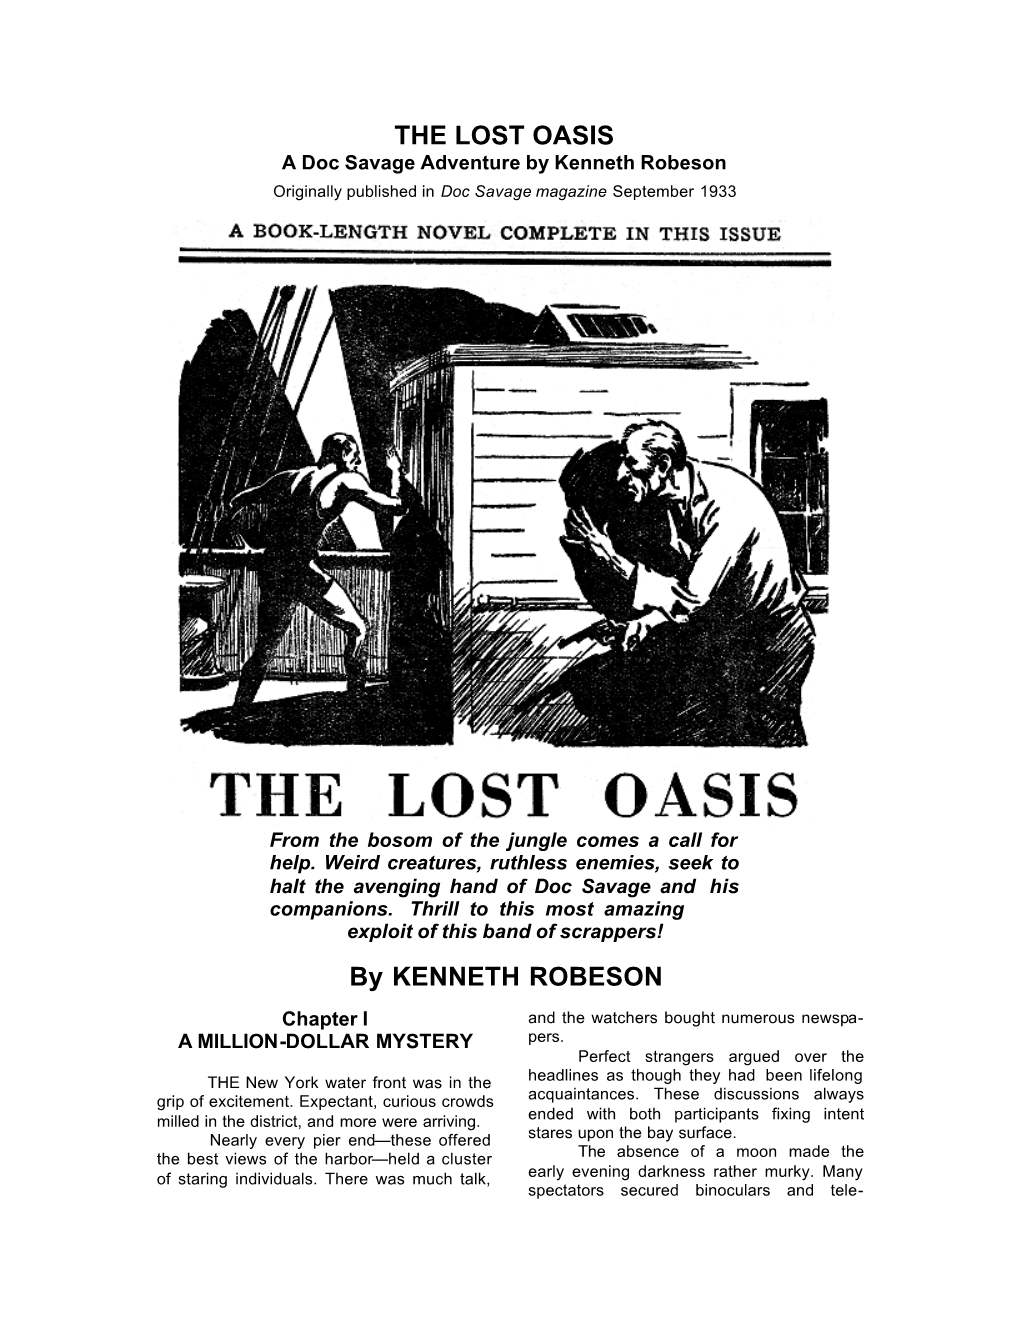 THE LOST OASIS by KENNETH ROBESON